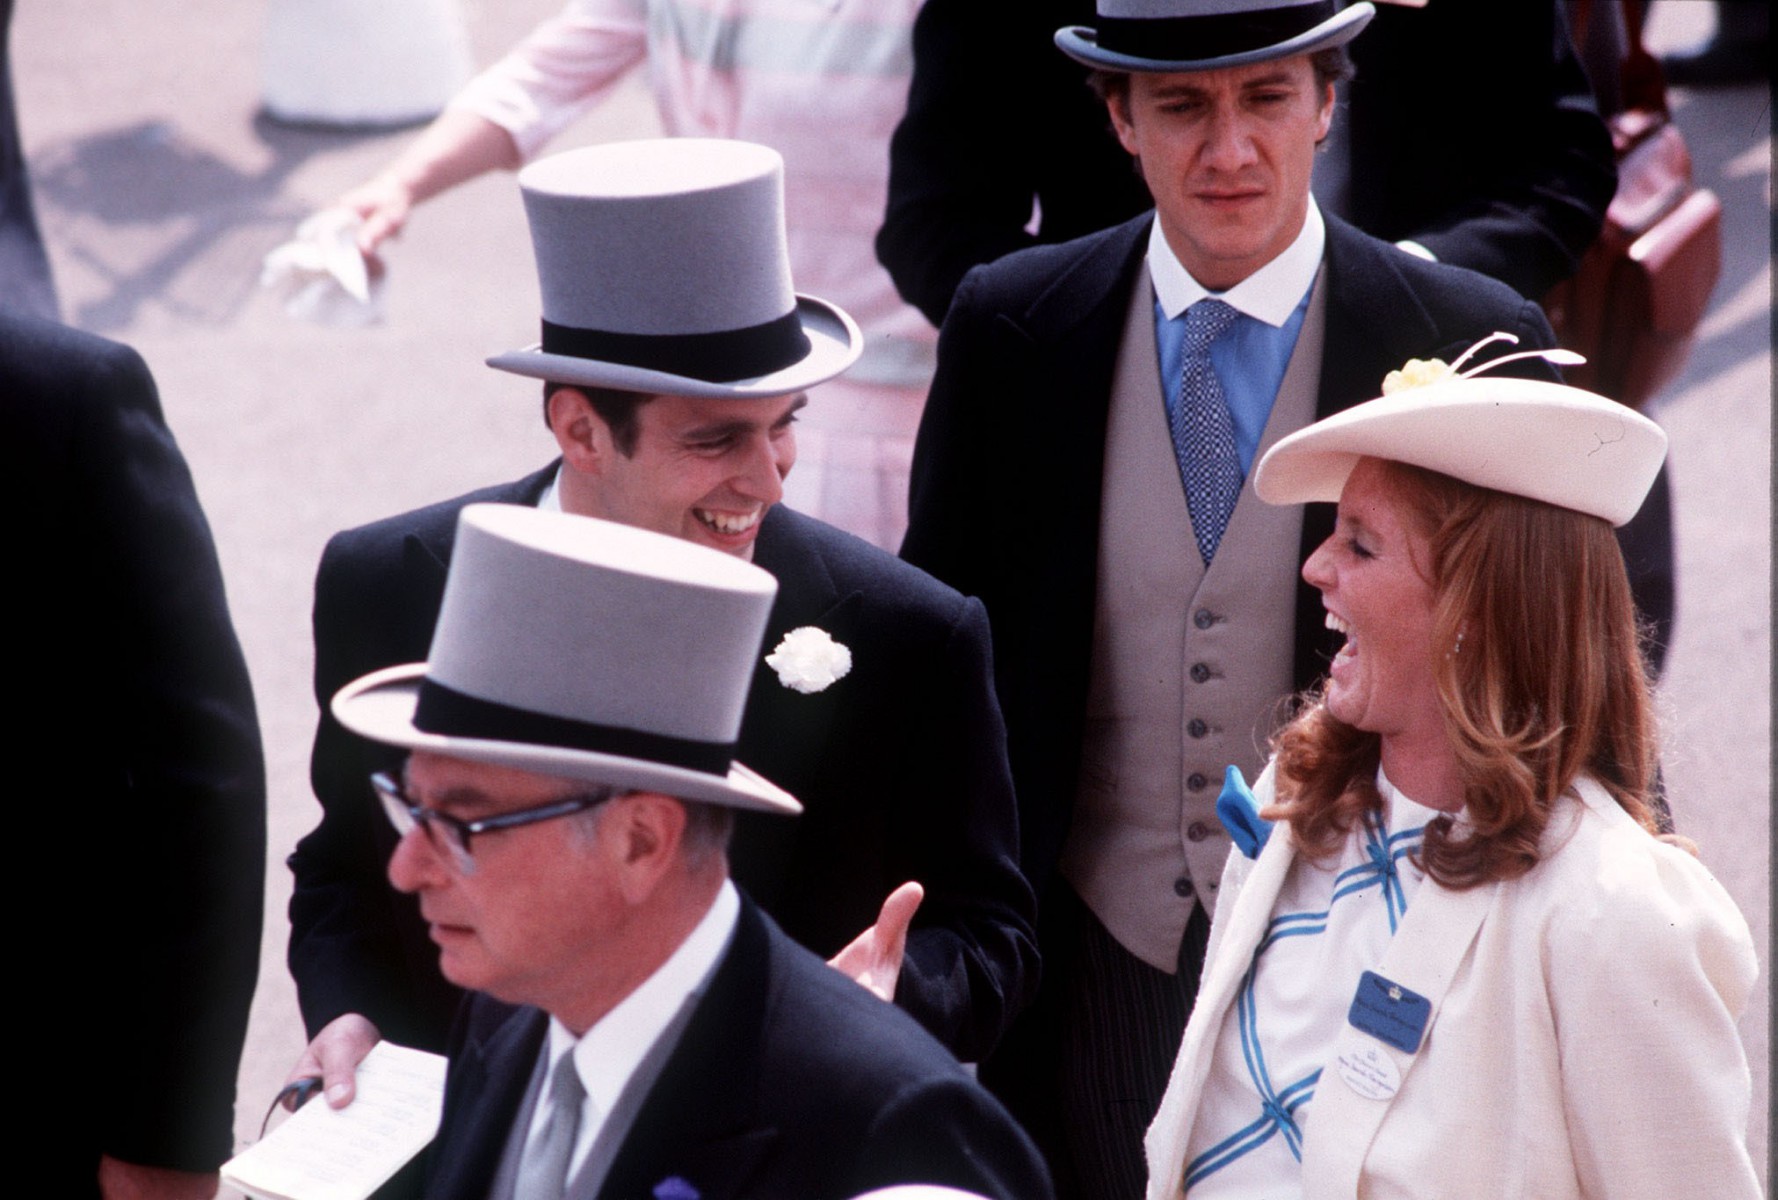 The Duke and Duchess of York met in 1985 at Ascot (pictured)